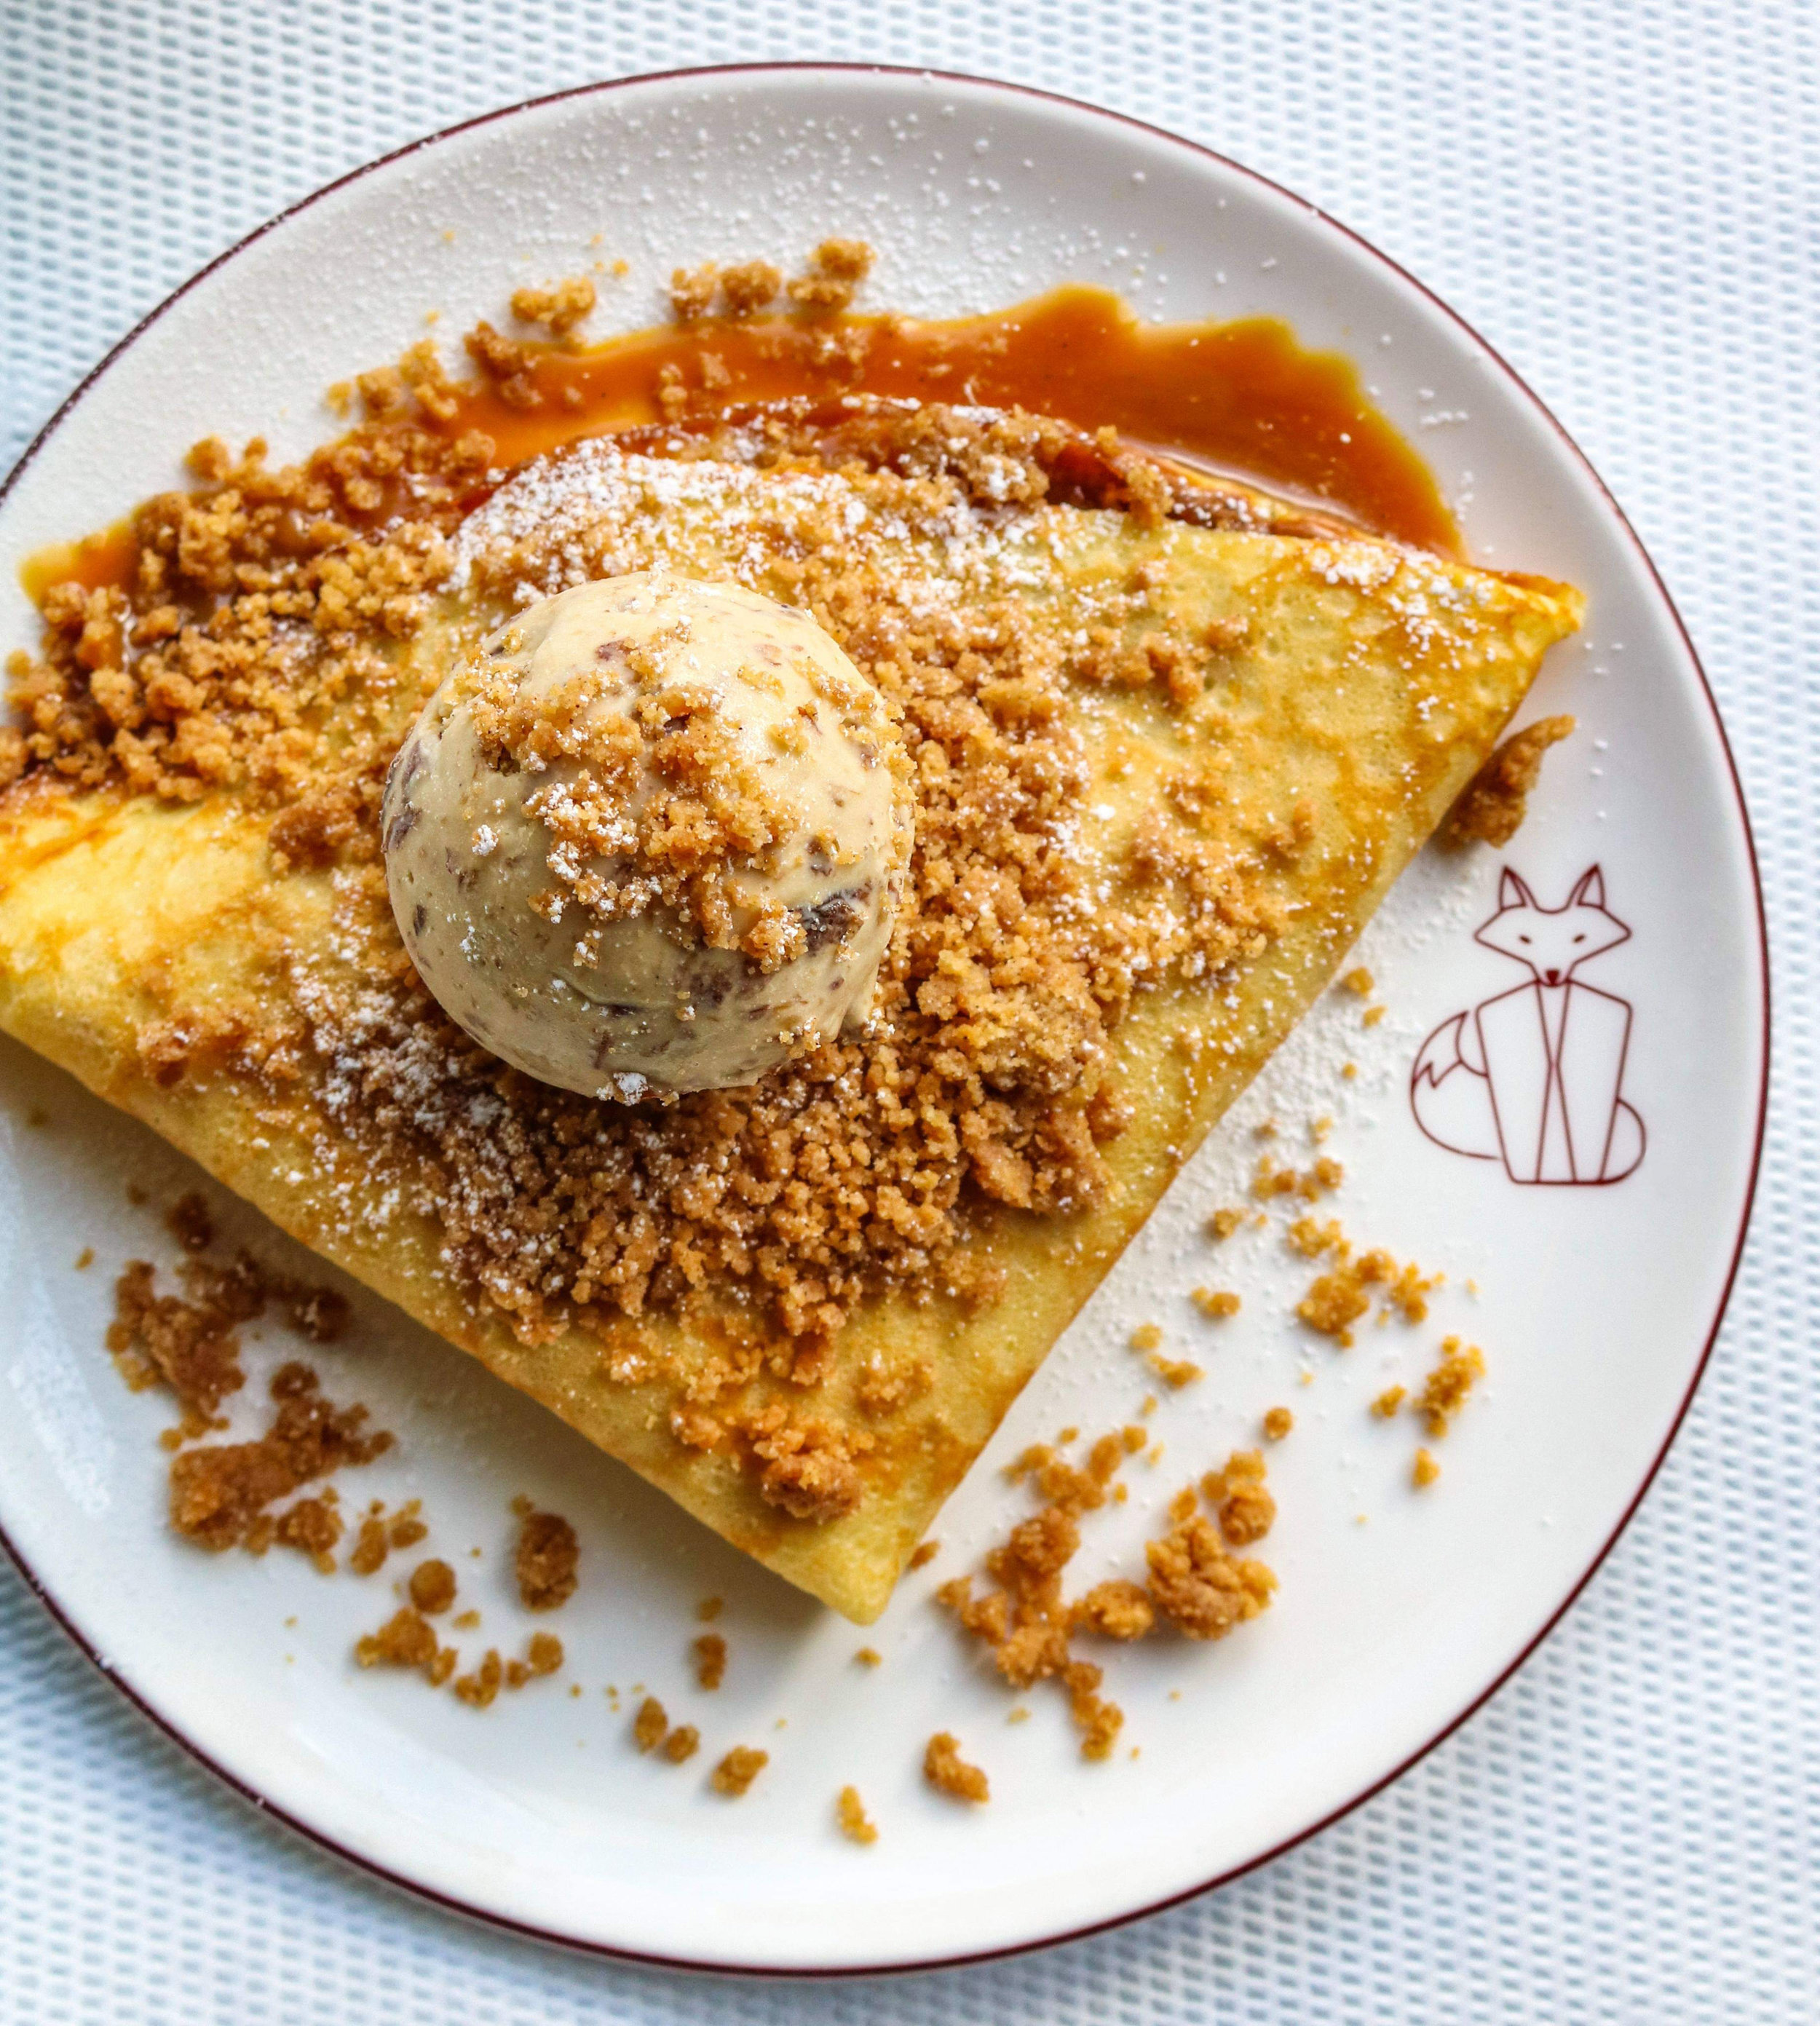  plate of banana crepe, folded into a triangular quarter topped with rum raisin ice cream and cinnamon streusel 